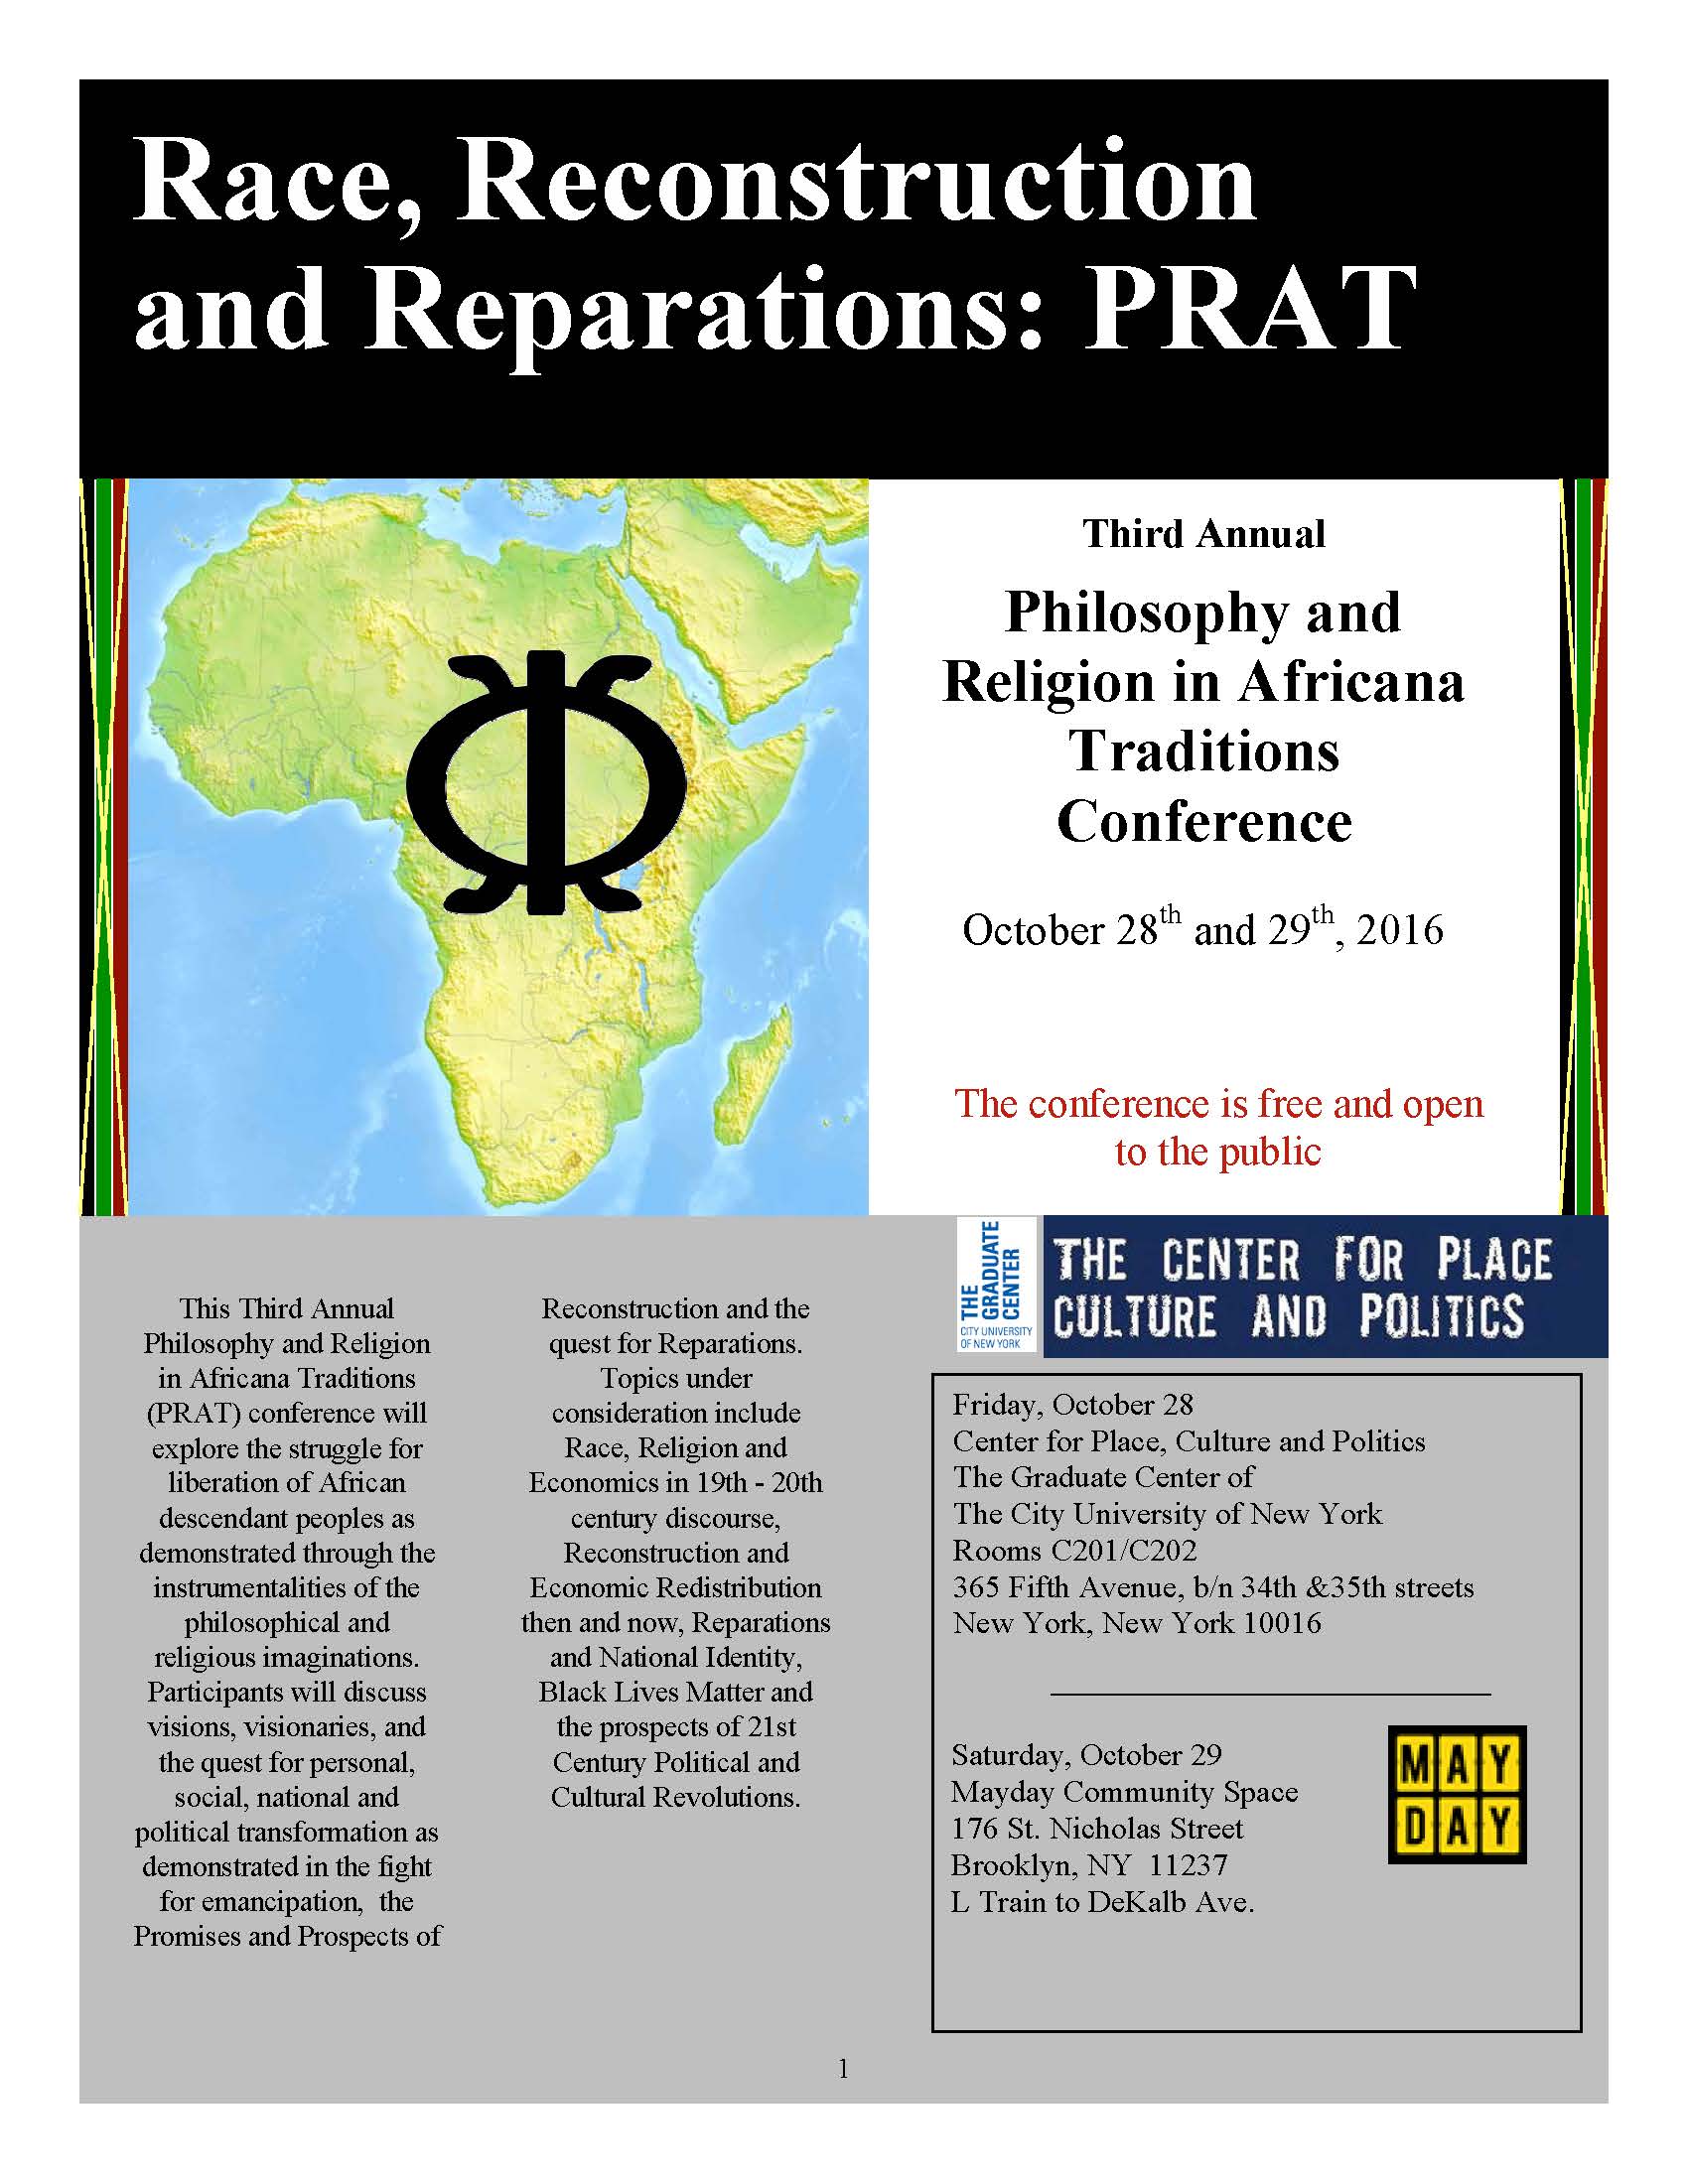 OCT 28/29: THIRD ANNUAL PHILOSOPHY AND RELIGION IN AFRICANA TRADITIONS CONFERENCE